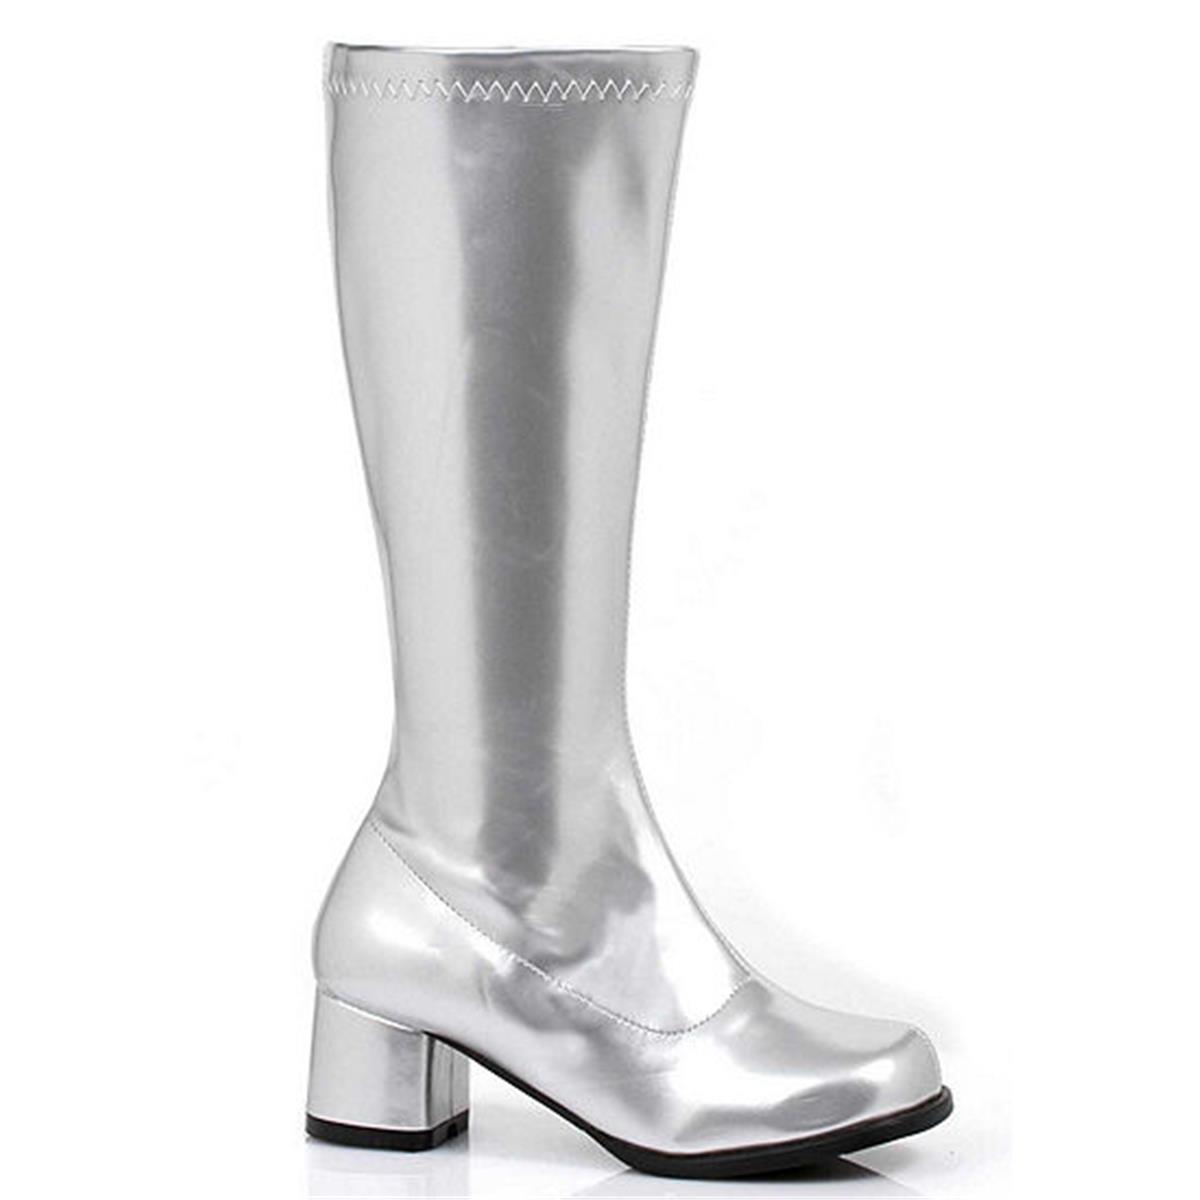 Picture of Rubies Costume 402921 Child Gogo Boot, Silver - Medium